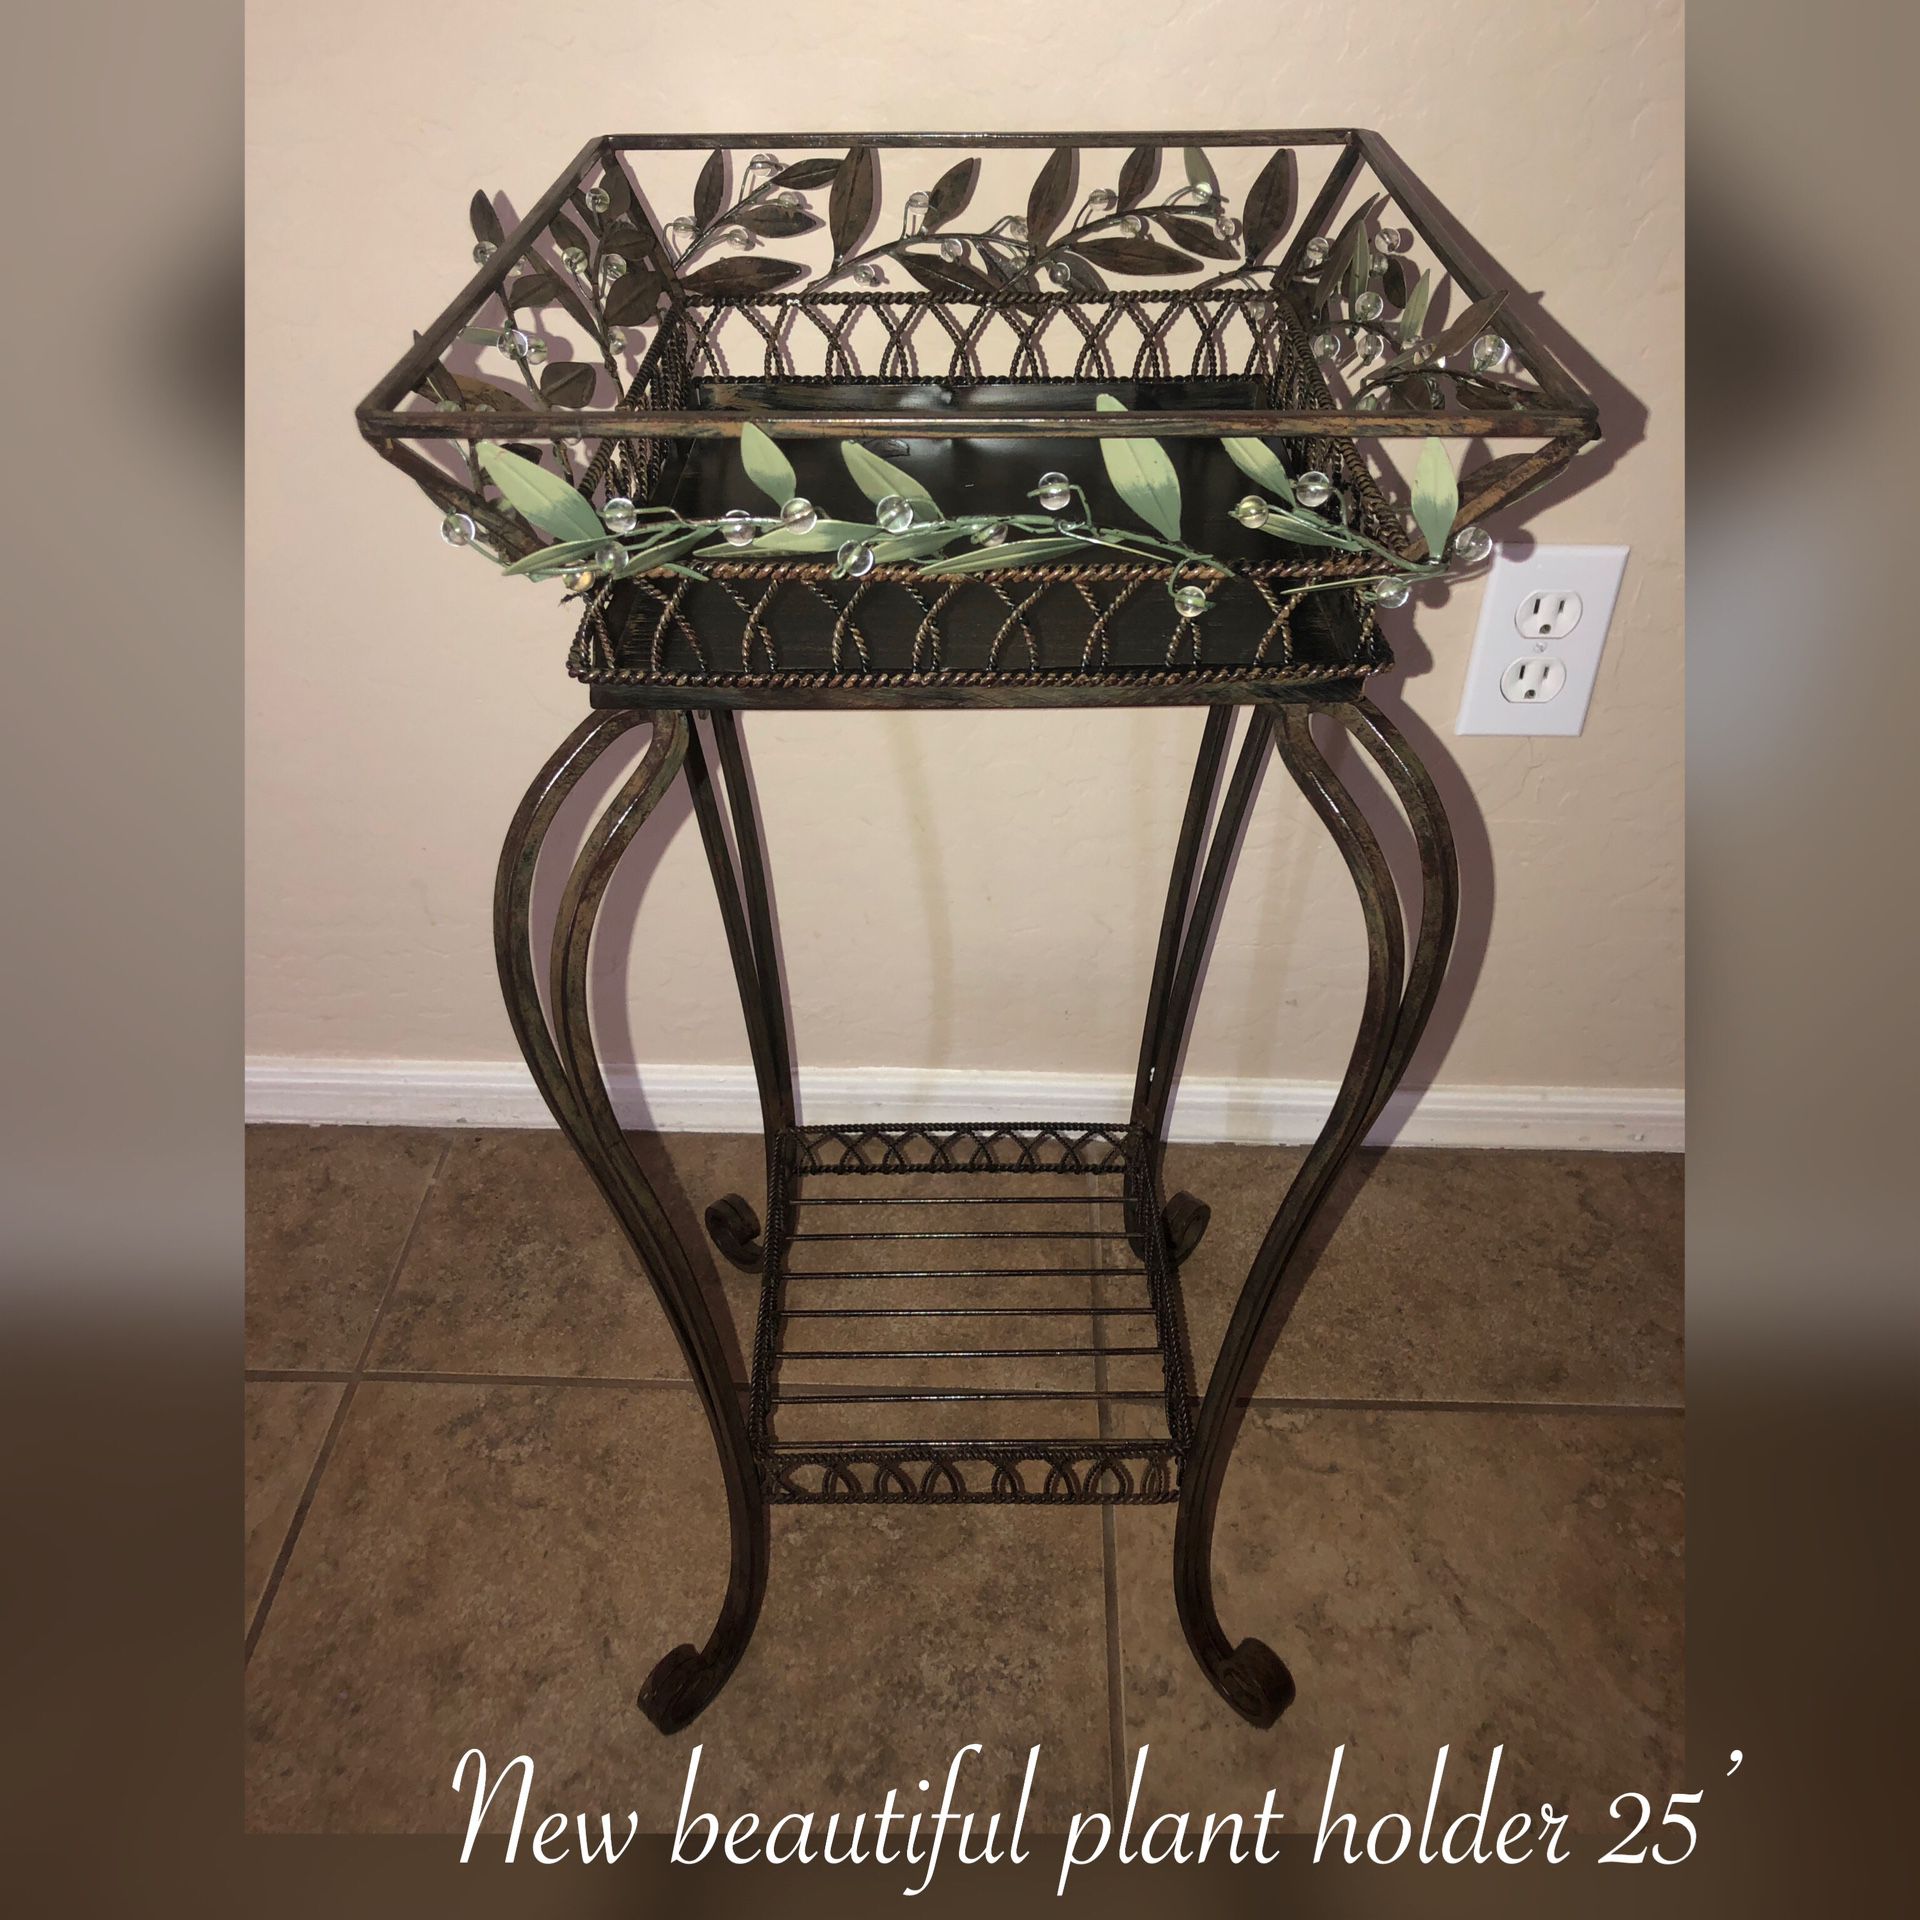 New beautiful plant holder brown metal 25’inches $40 Firm